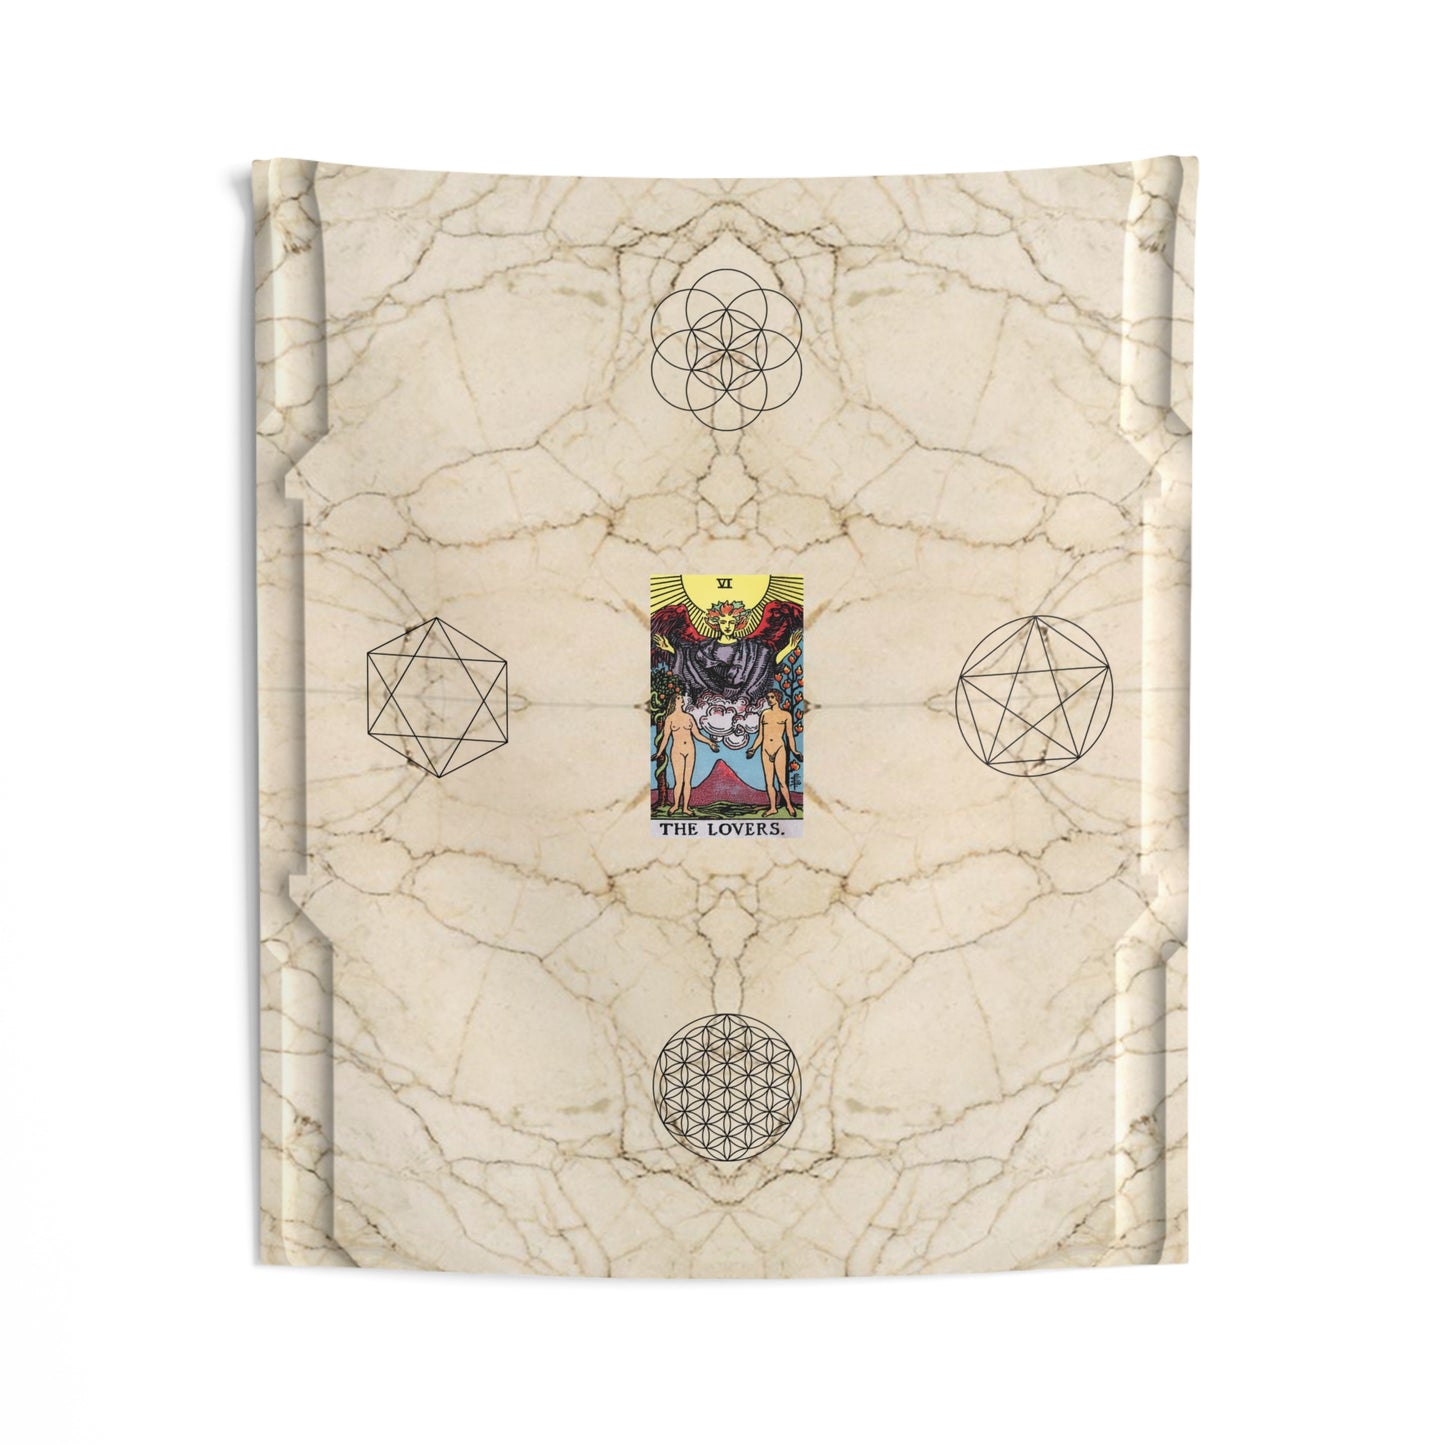 The Lovers Tarot Card Altar Cloth or Tapestry with Marble Background, Flower of Life and Seed of Life